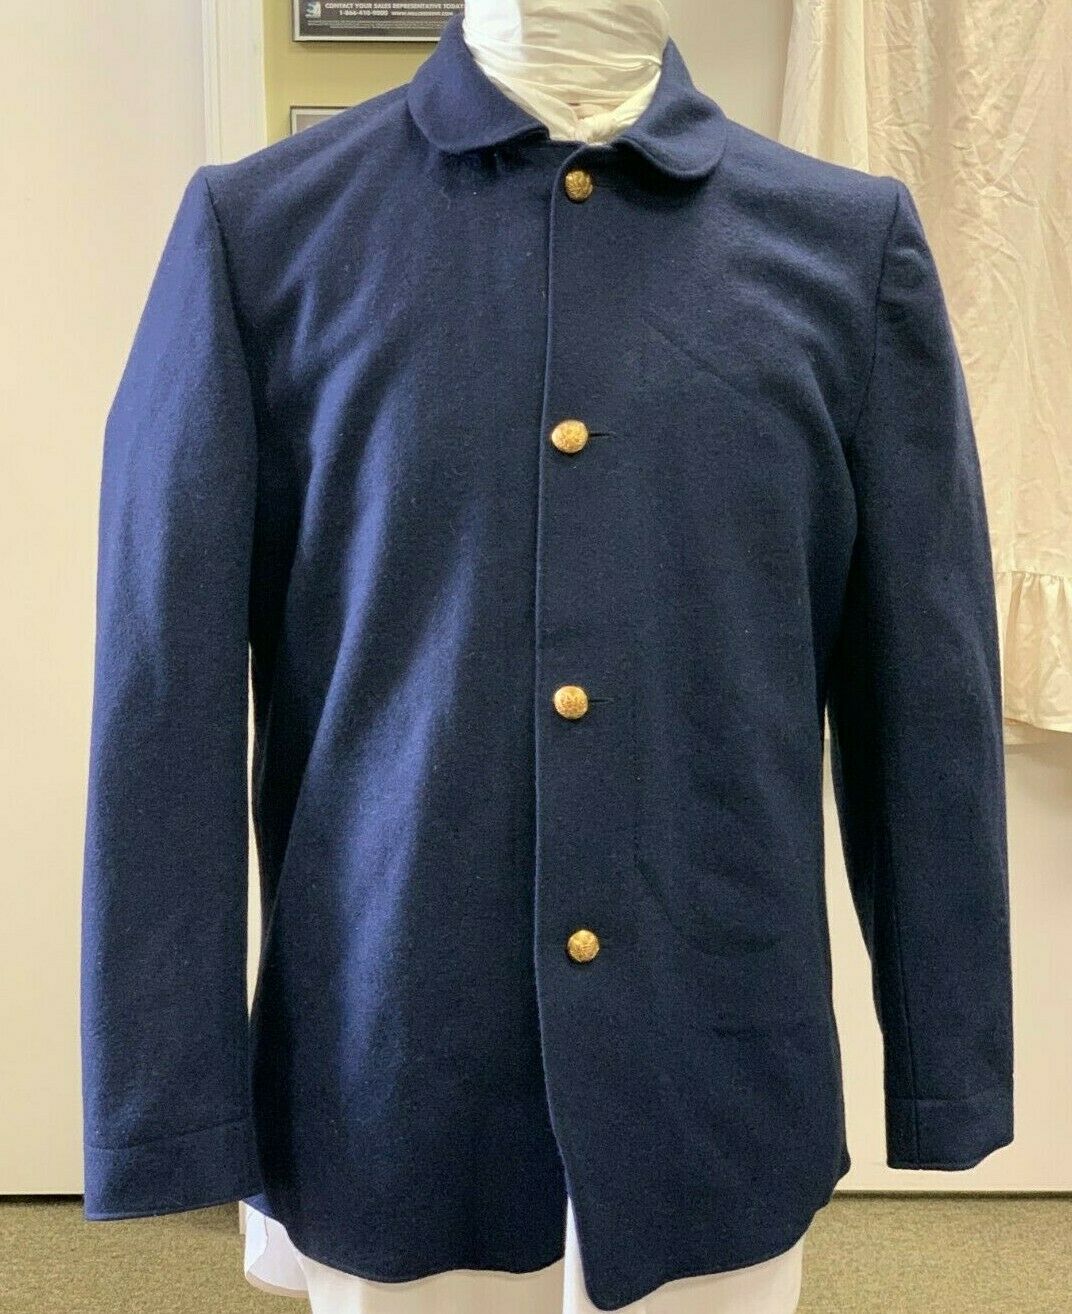 Civil War Union Army Blue Wool Sack Coat, Sz 42r Chest - Unlined Solid Wool